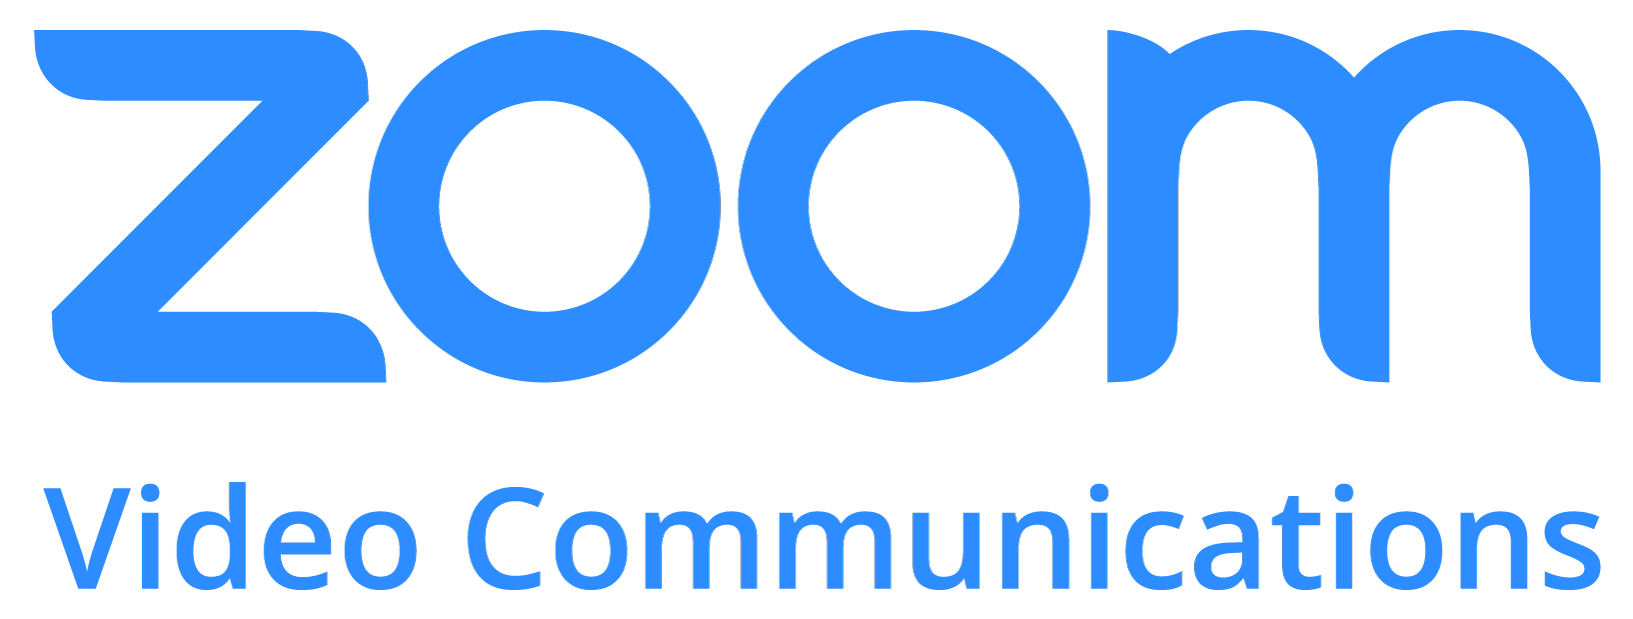 Zoom Logo PNG High-Quality Image